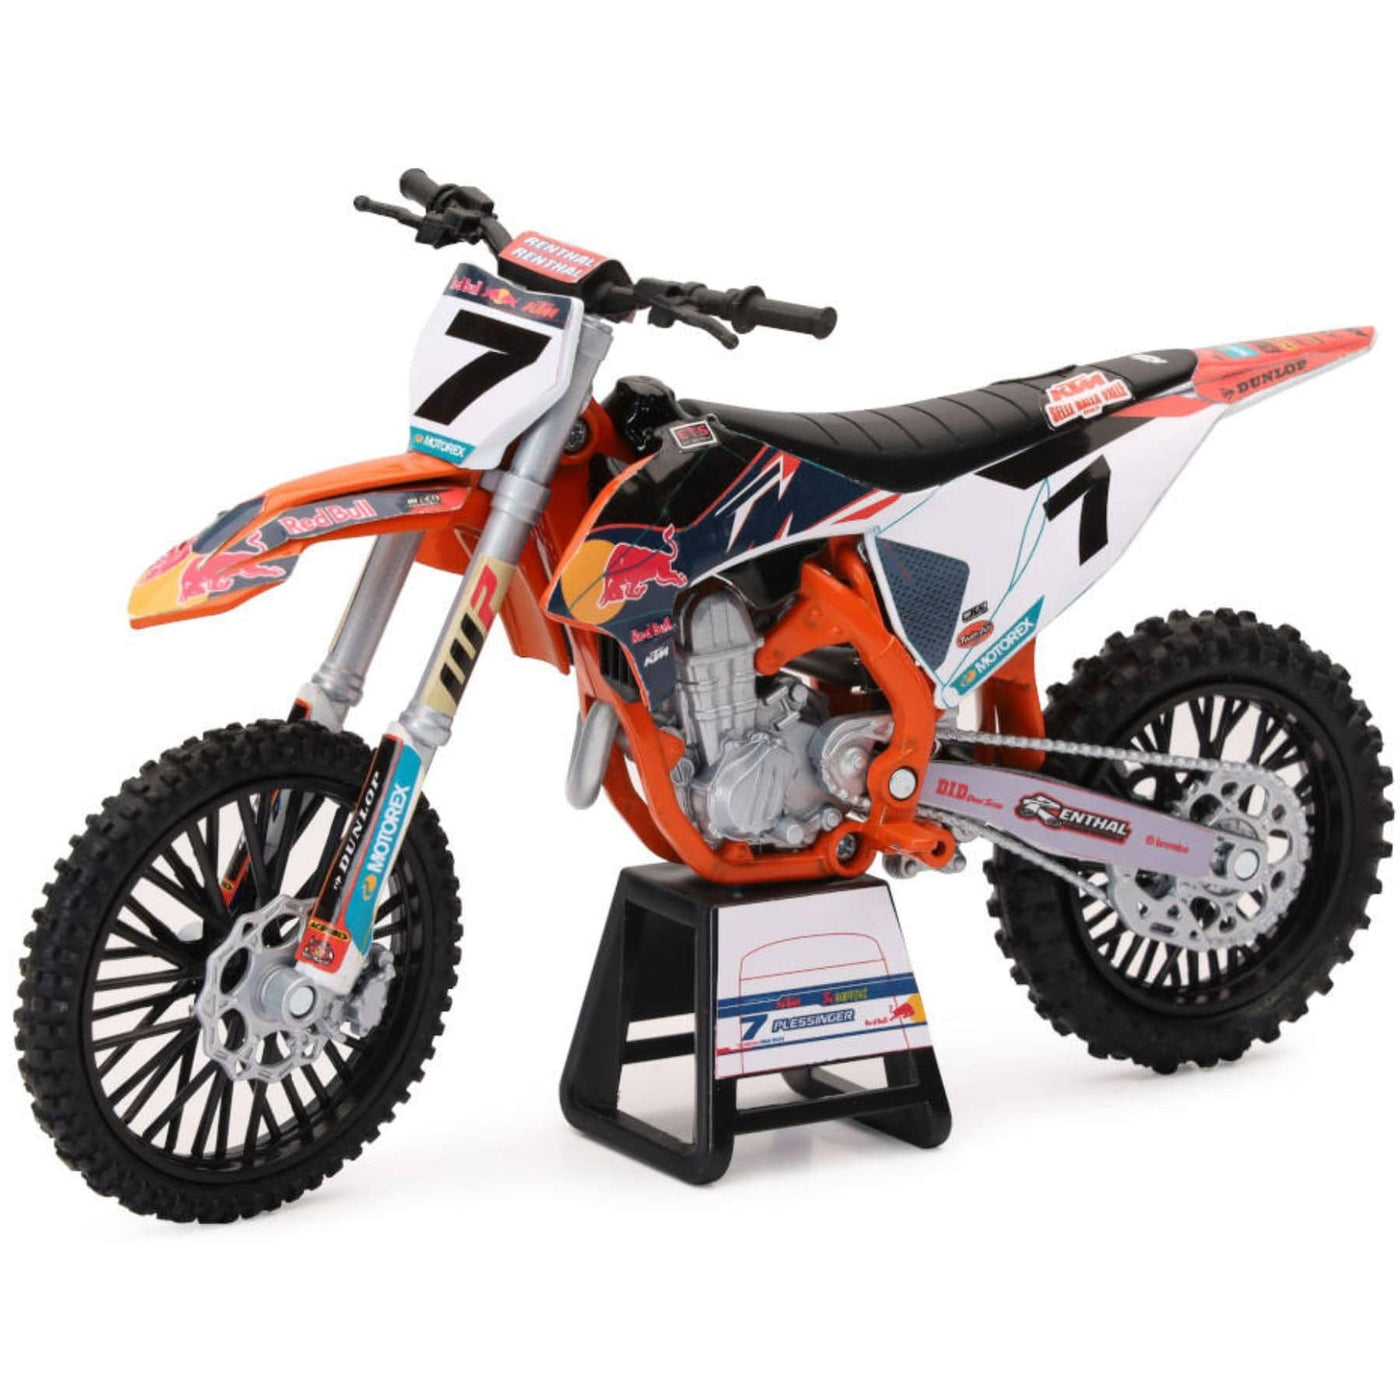 New Ray KTM Kids Toy - Aaron Plessinger #7